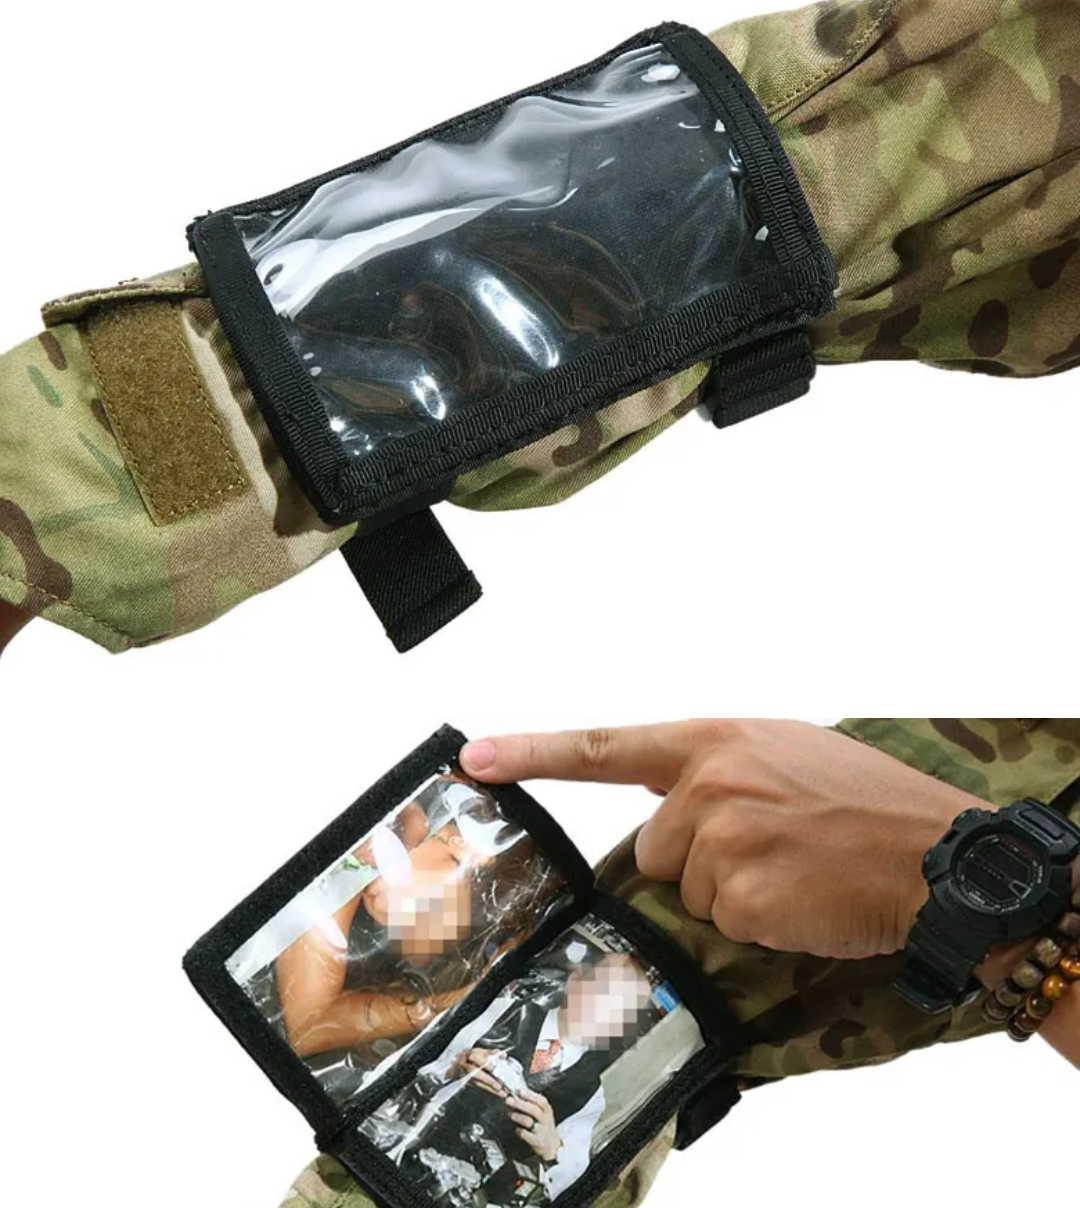 Tactical wrist pouch, map bag, phone/GPS holder